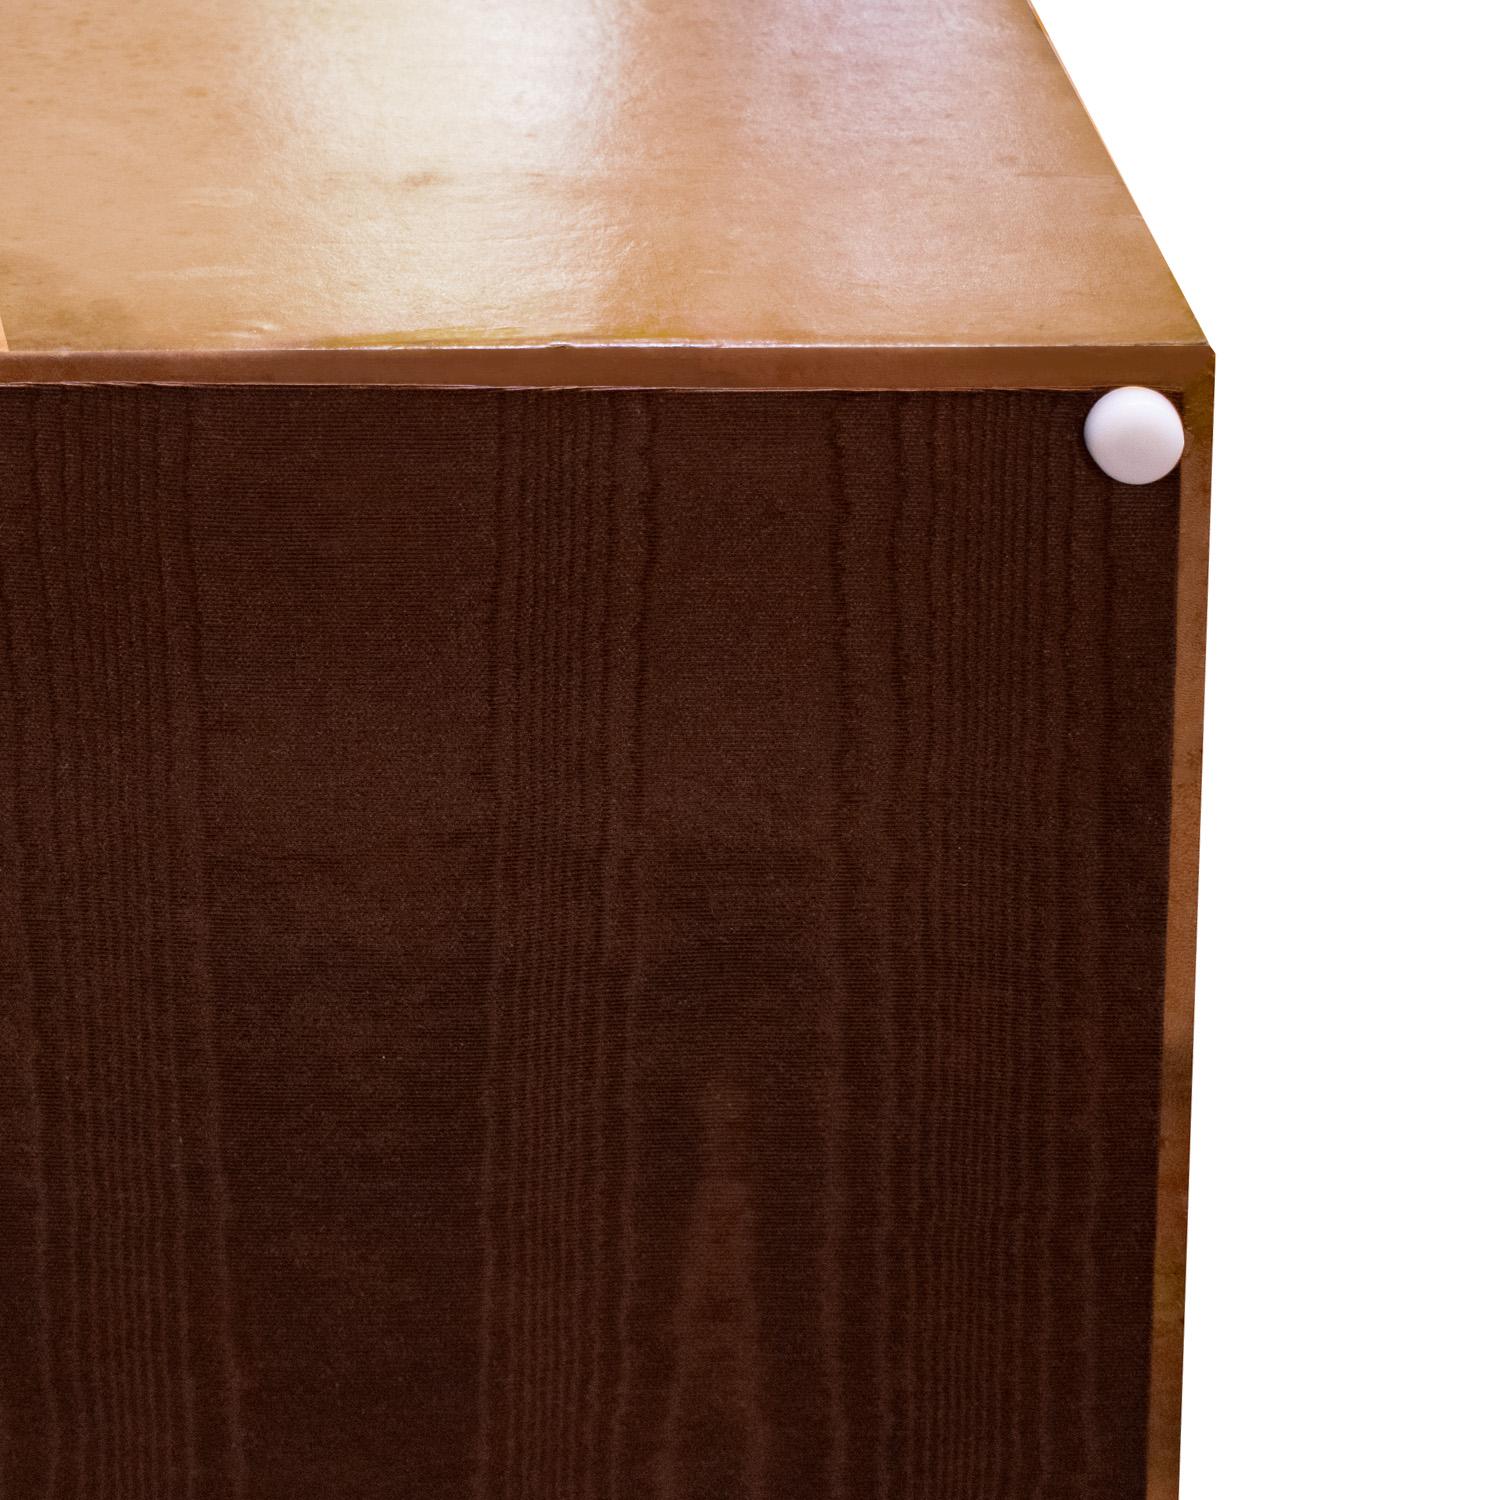 Karl Springer Exceptional Box Table In Leather 1976-1978 For Sale 1